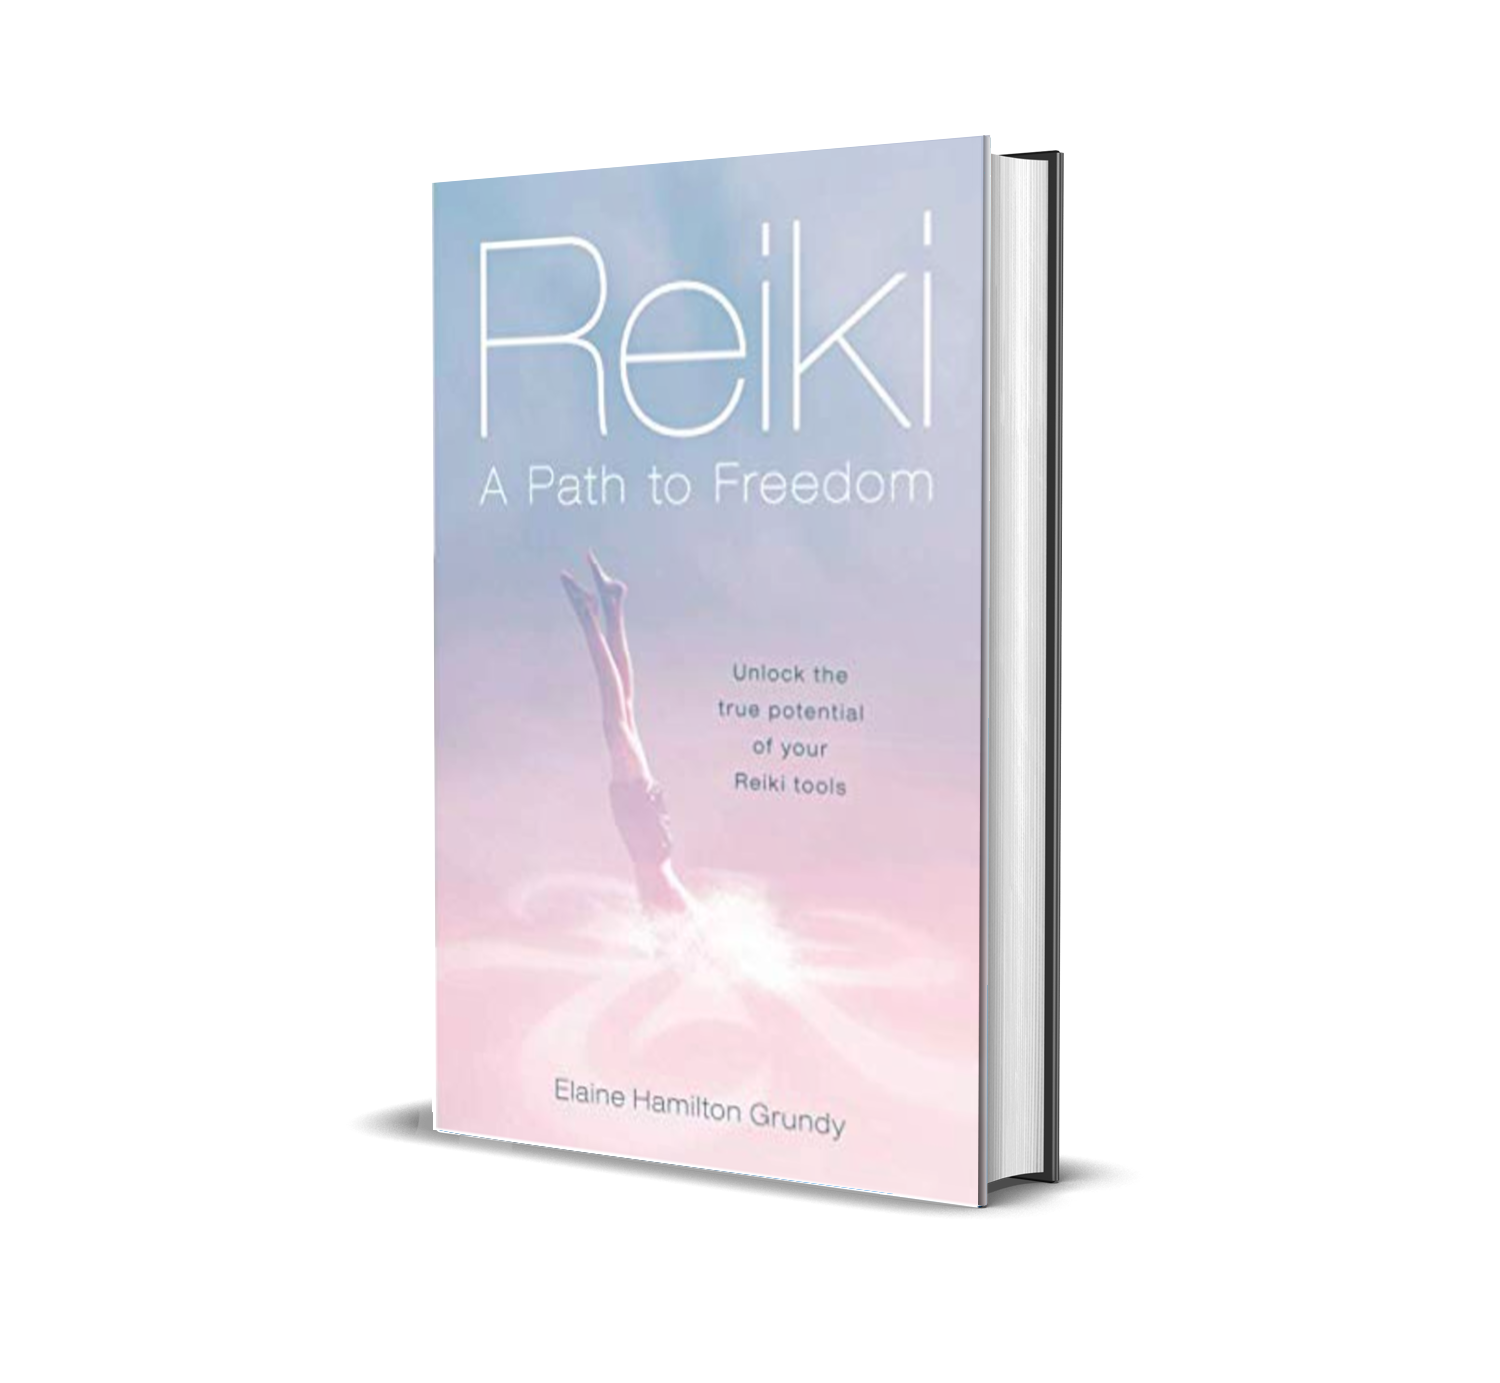 Reiki – A Path to Freedom: Unlock the true potential of your Reiki tools